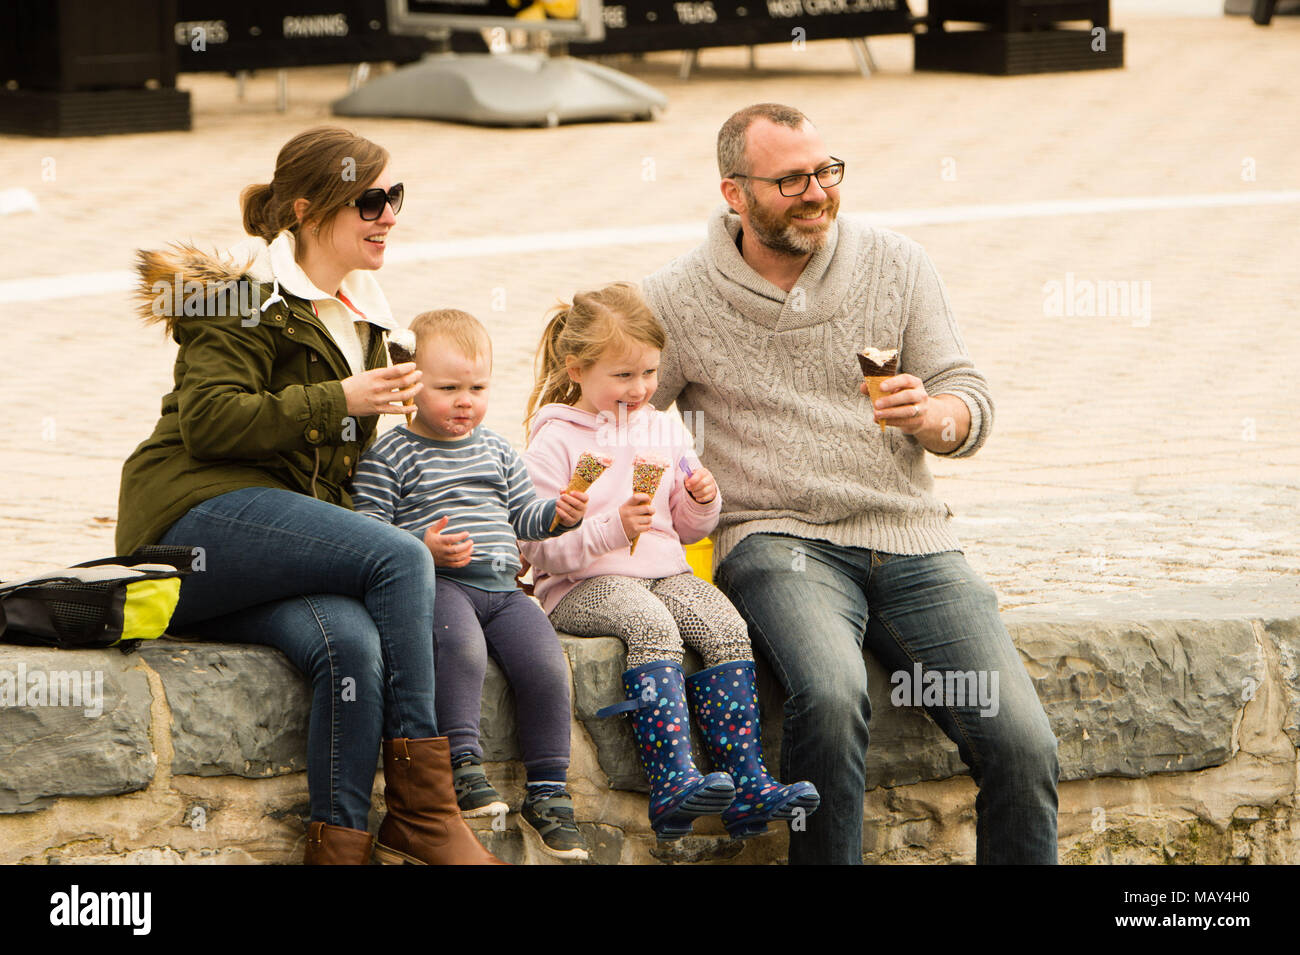 Aberystwyth Wales UK, Thursday  05 April 2018  UK Weather: A family eating icecreams   enjoying an afternoon of warm spring sunshine, with temperatures in the low teens Centigrade,  at the seaside in Aberystwyth on the west coast of Wales   photo © Keith Morris / Alamy Live News Stock Photo